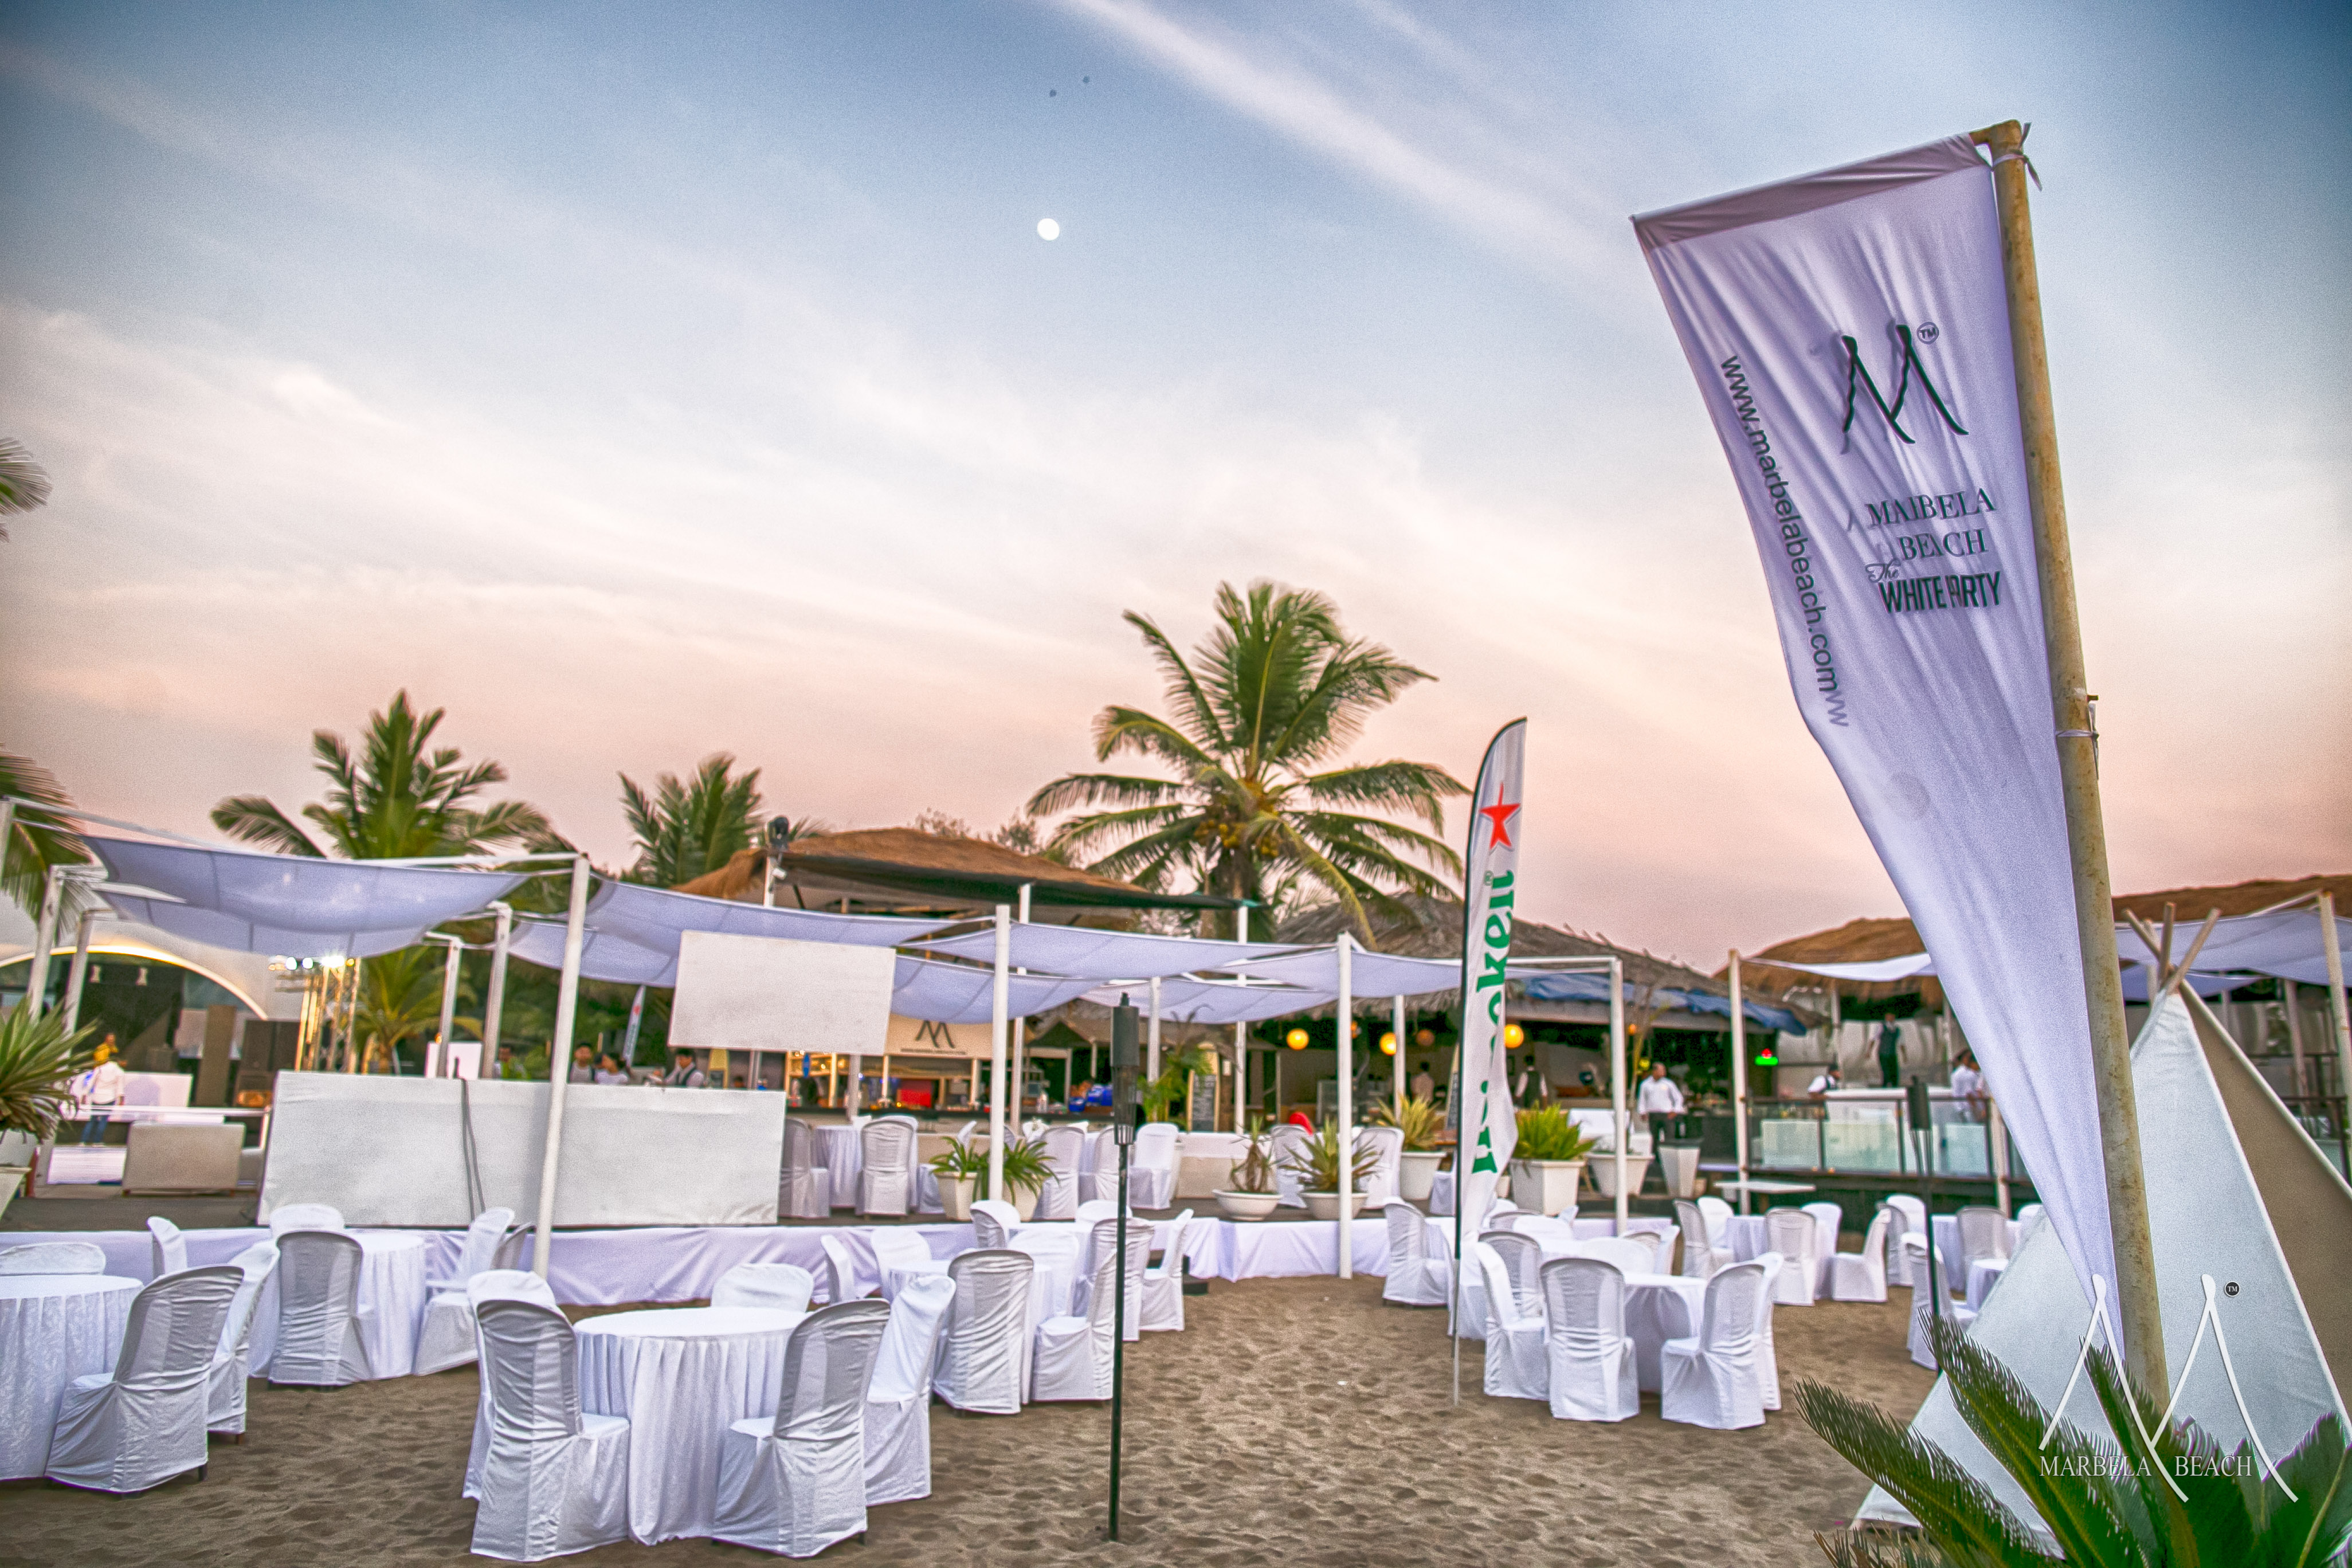 You are currently viewing THE MARBELA BEACH WHITE PARTY